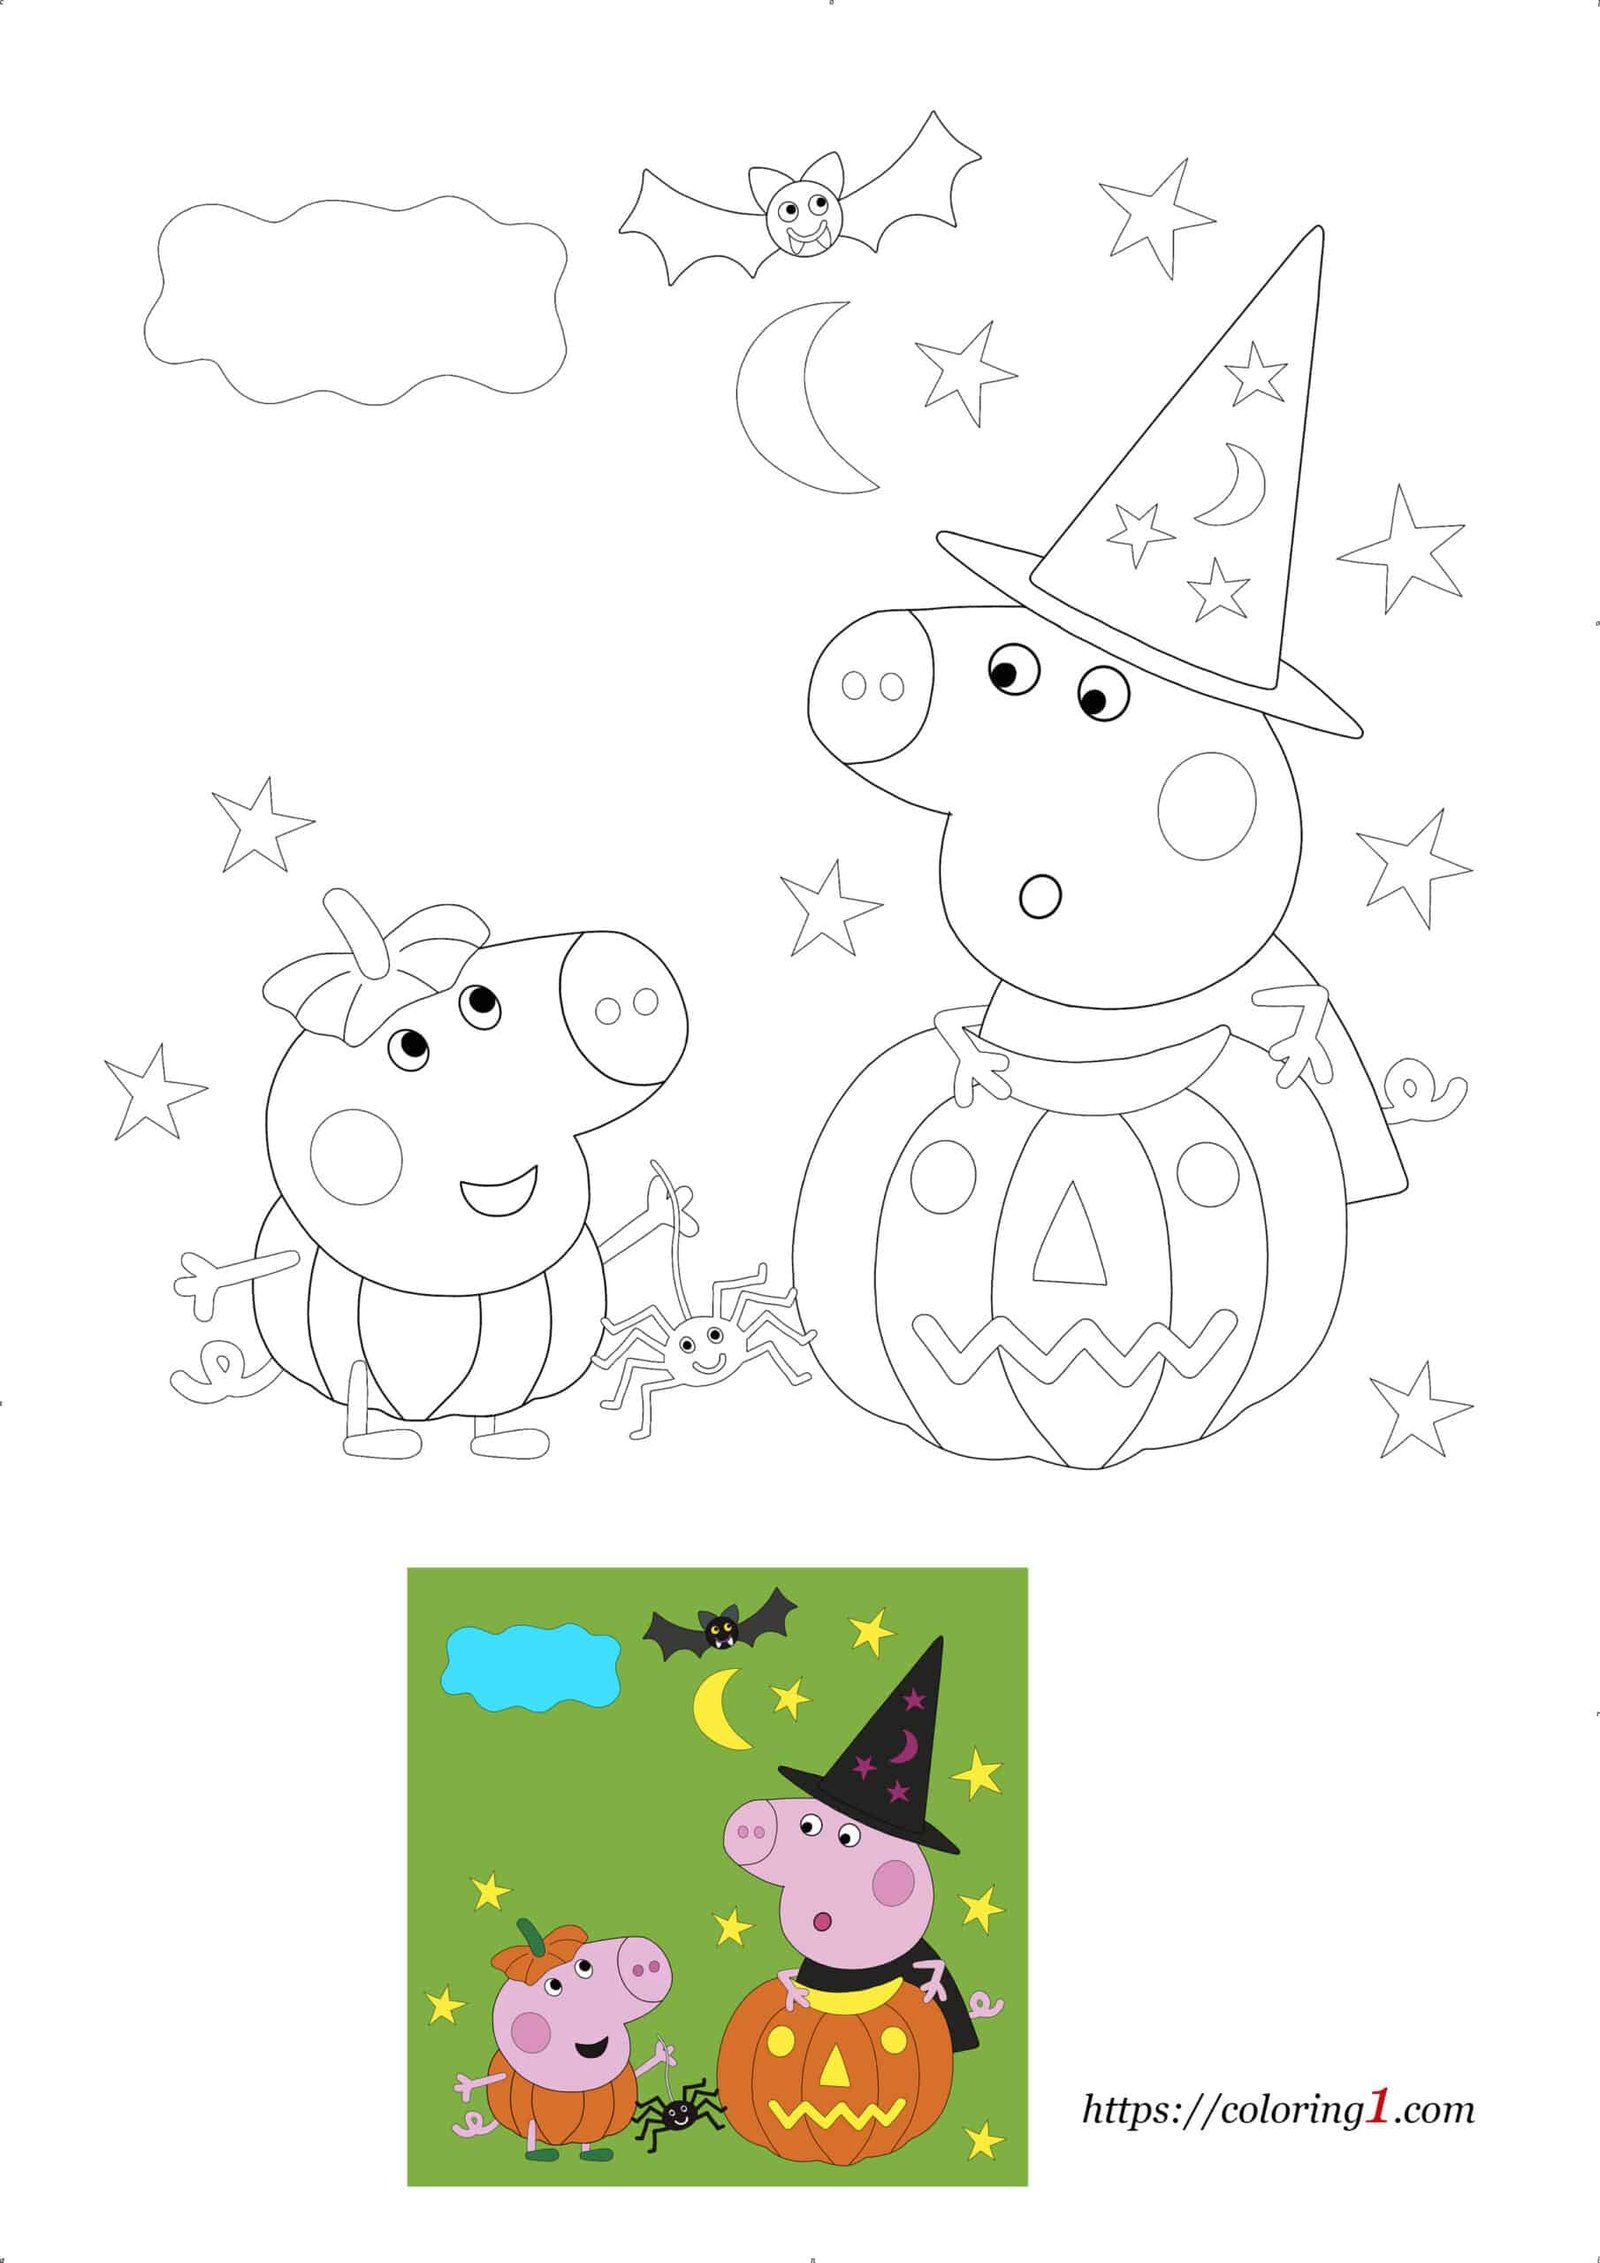 Peppa Pig Halloween coloring page to print